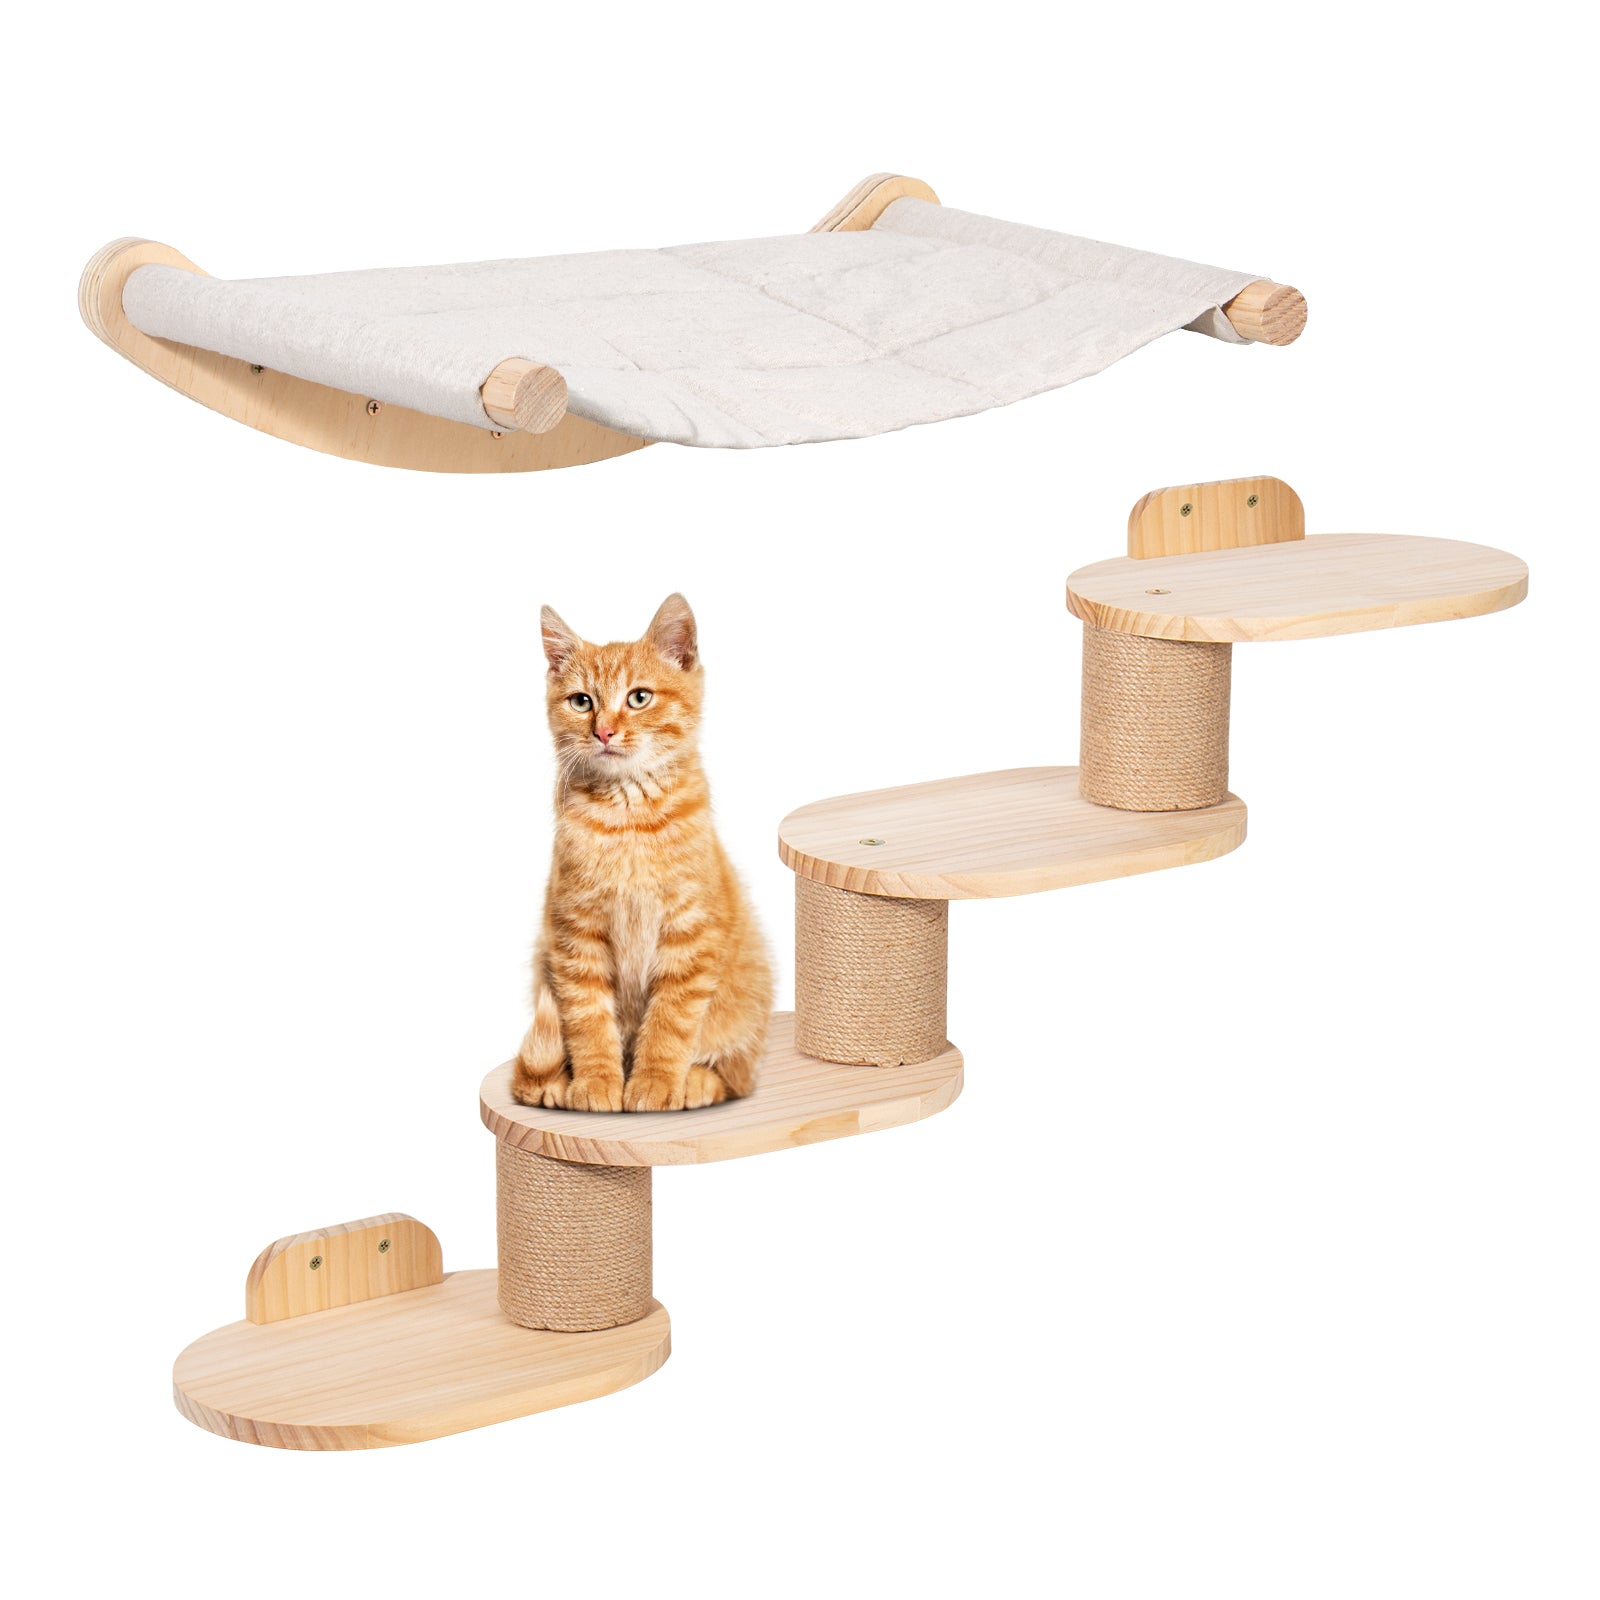 Wall-Mounted-Cat-Climbing-Wall-with-Cat-Stairs-and-Cat-Hammock-Four-Level-Cat-Climbing-Wall-with-Jute-Stripes-for-Cats-and-Non-Slip-Mat-2-in-1-Cat-Ladder-Wall-Mounted-Cat-Climbing-Wall